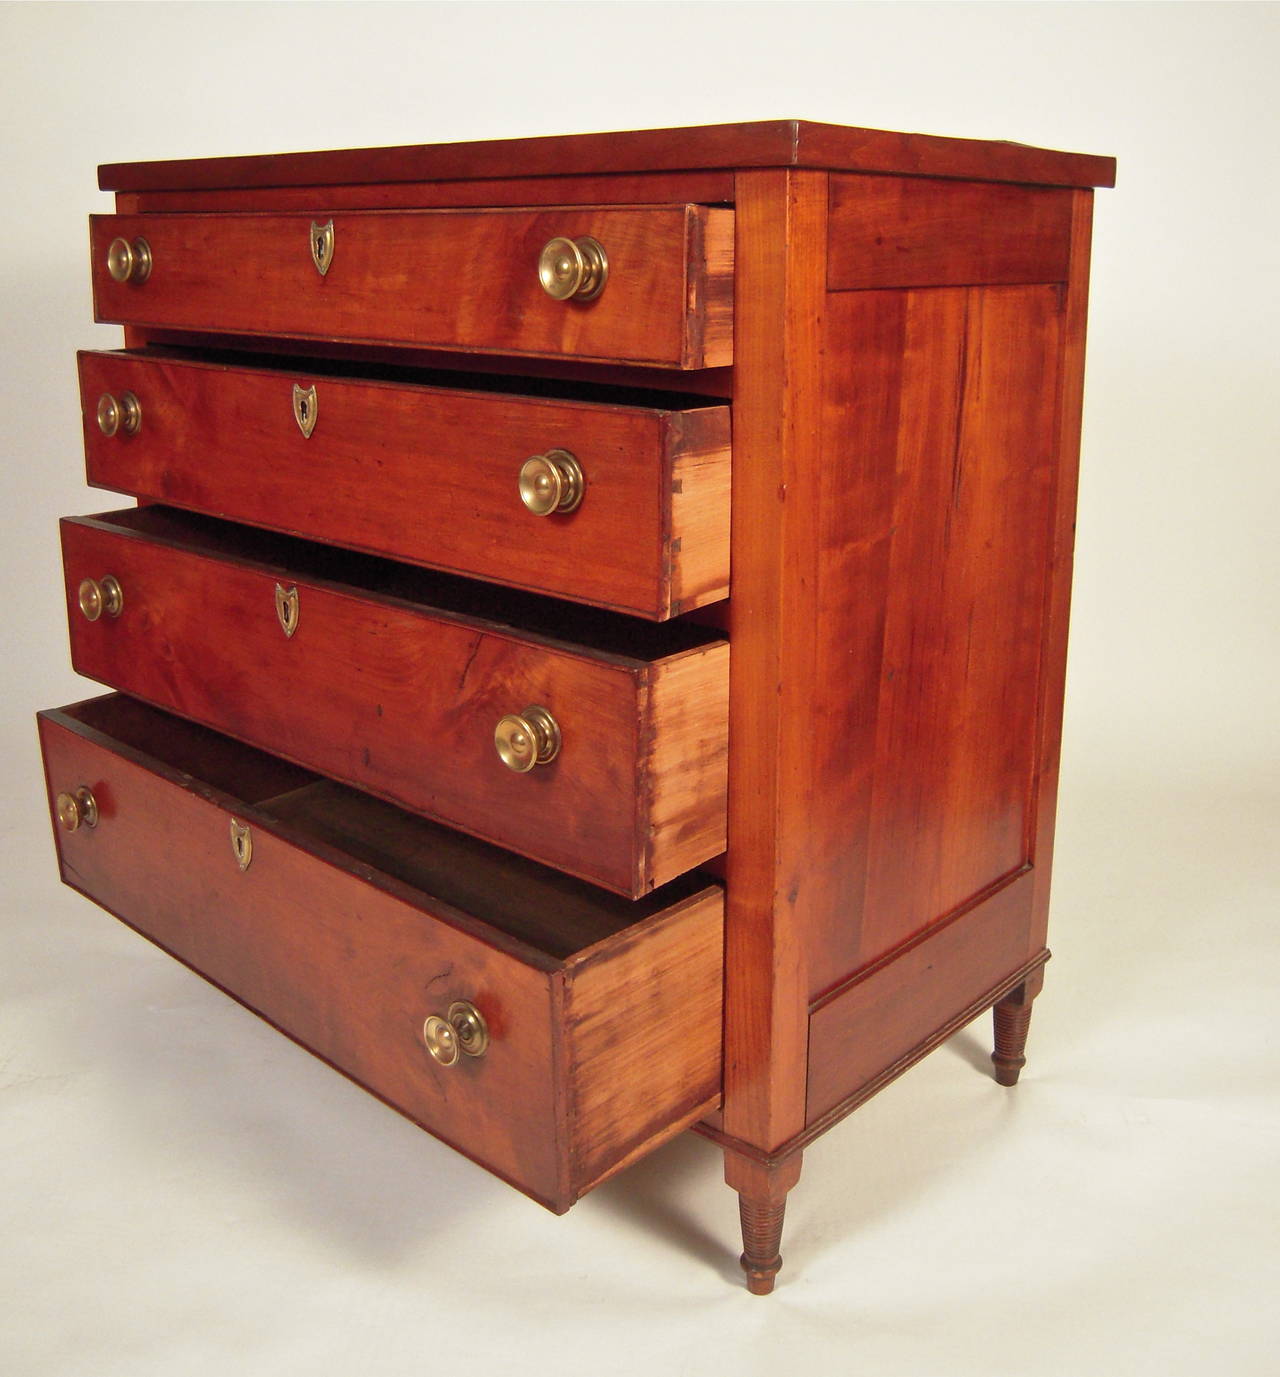 A Biedermeier classically proportioned chest of drawers in cherry, circa 1830s, the rectangular case with 4 cockbeaded, graduated drawers, each with 2 brass drawer pulls and centered by shield shaped brass escutcheons, raised on 4 tapered spirally